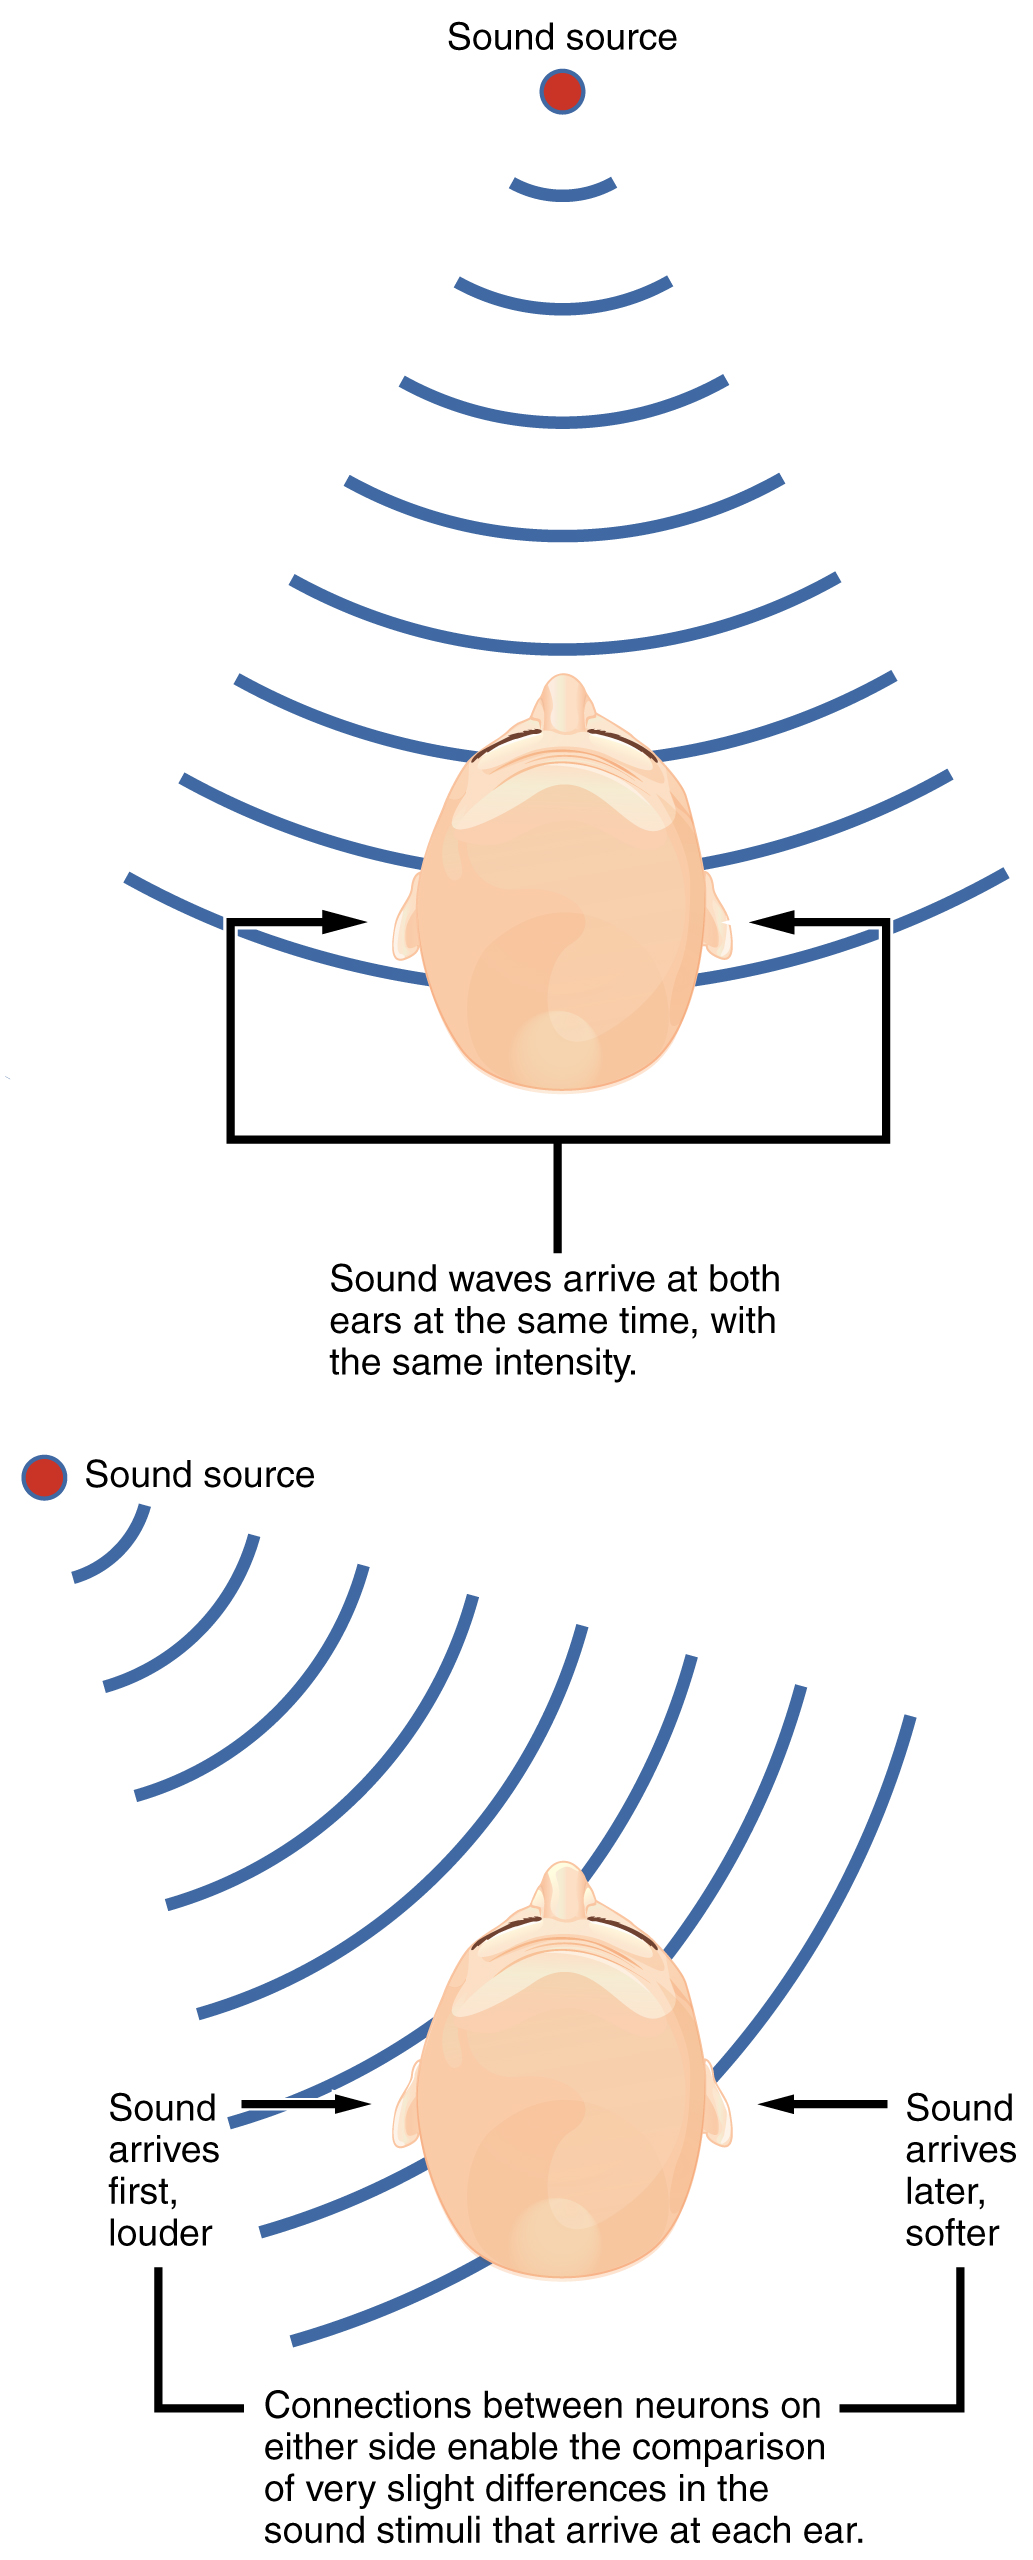 The top panel shows a person hearing a sound source that arrives in both his ears at the same time with the same intensity. The bottom panel shows a sound source that is not centered and arrives at different times with different intensities in each ear.